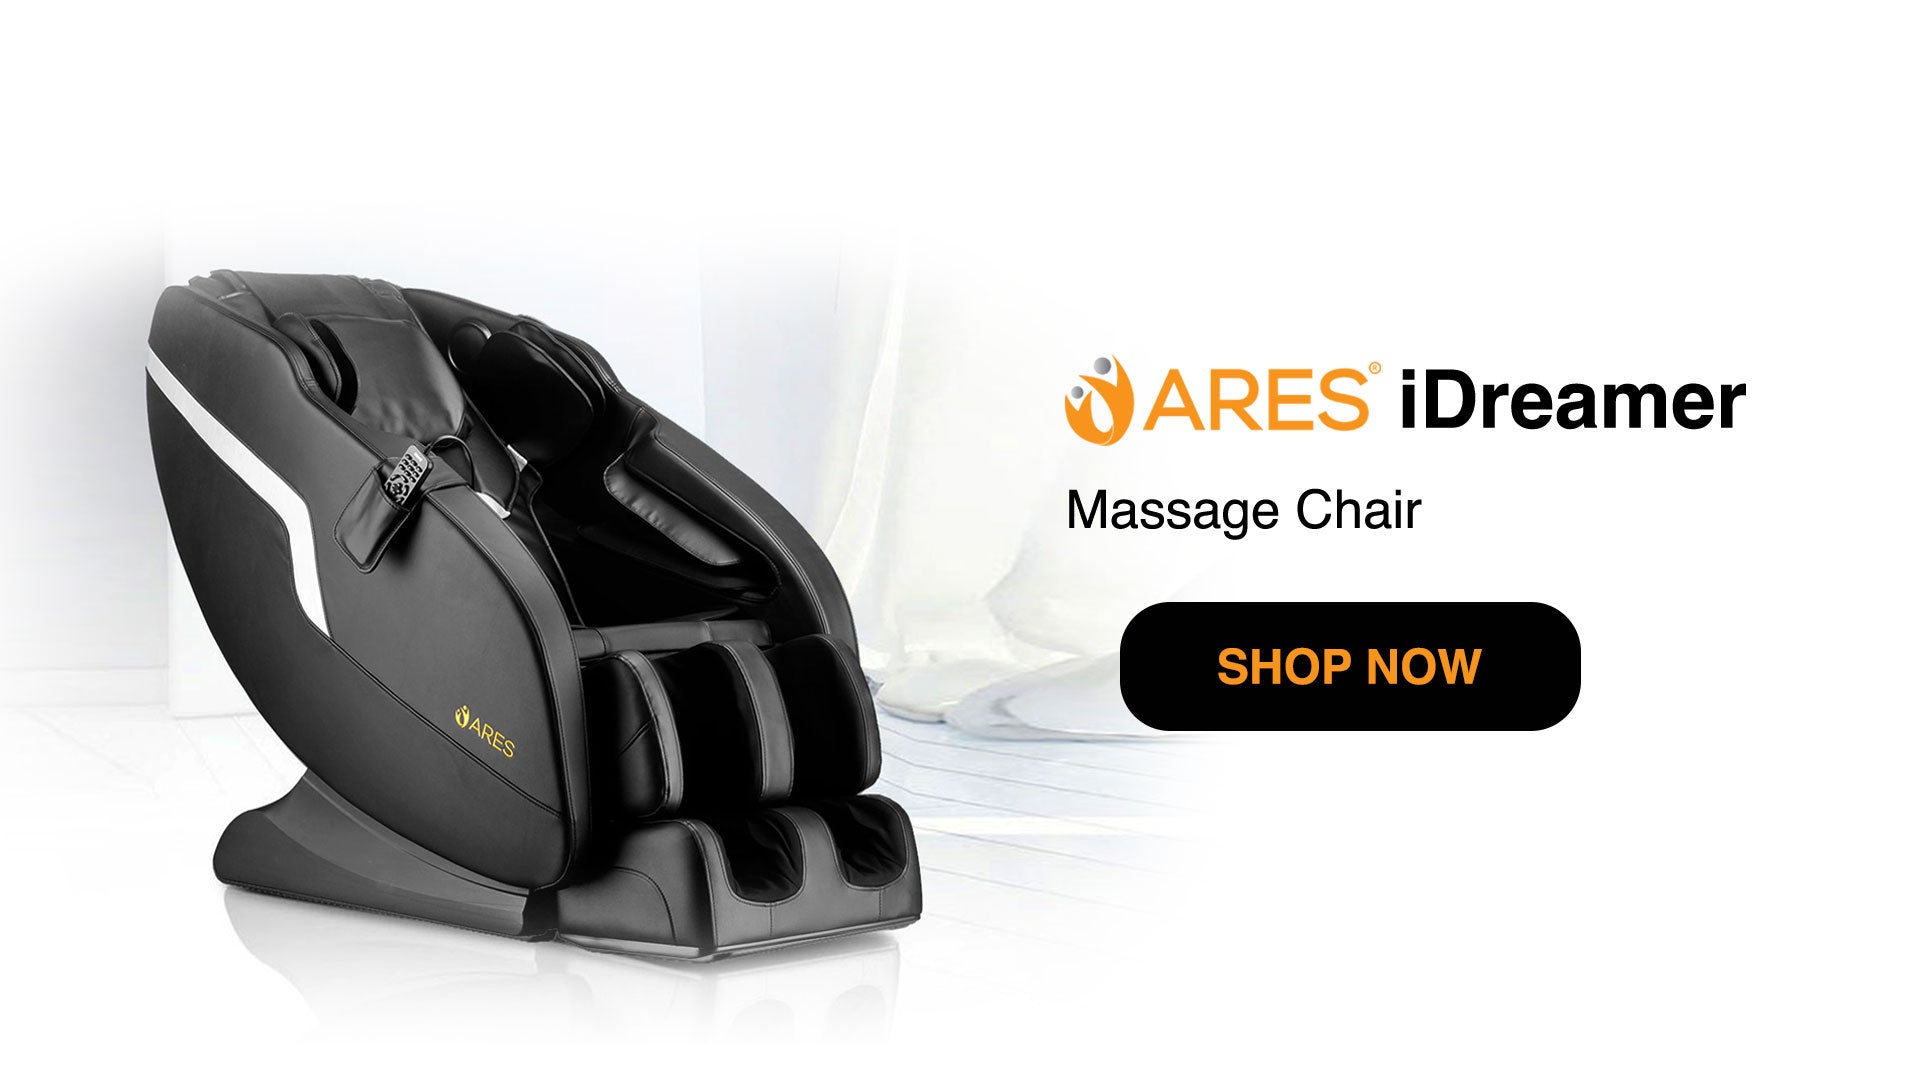 Revitalize Your Senses: The Ares iDreamer Massage Chair - Where Tranquility Meets Technology!